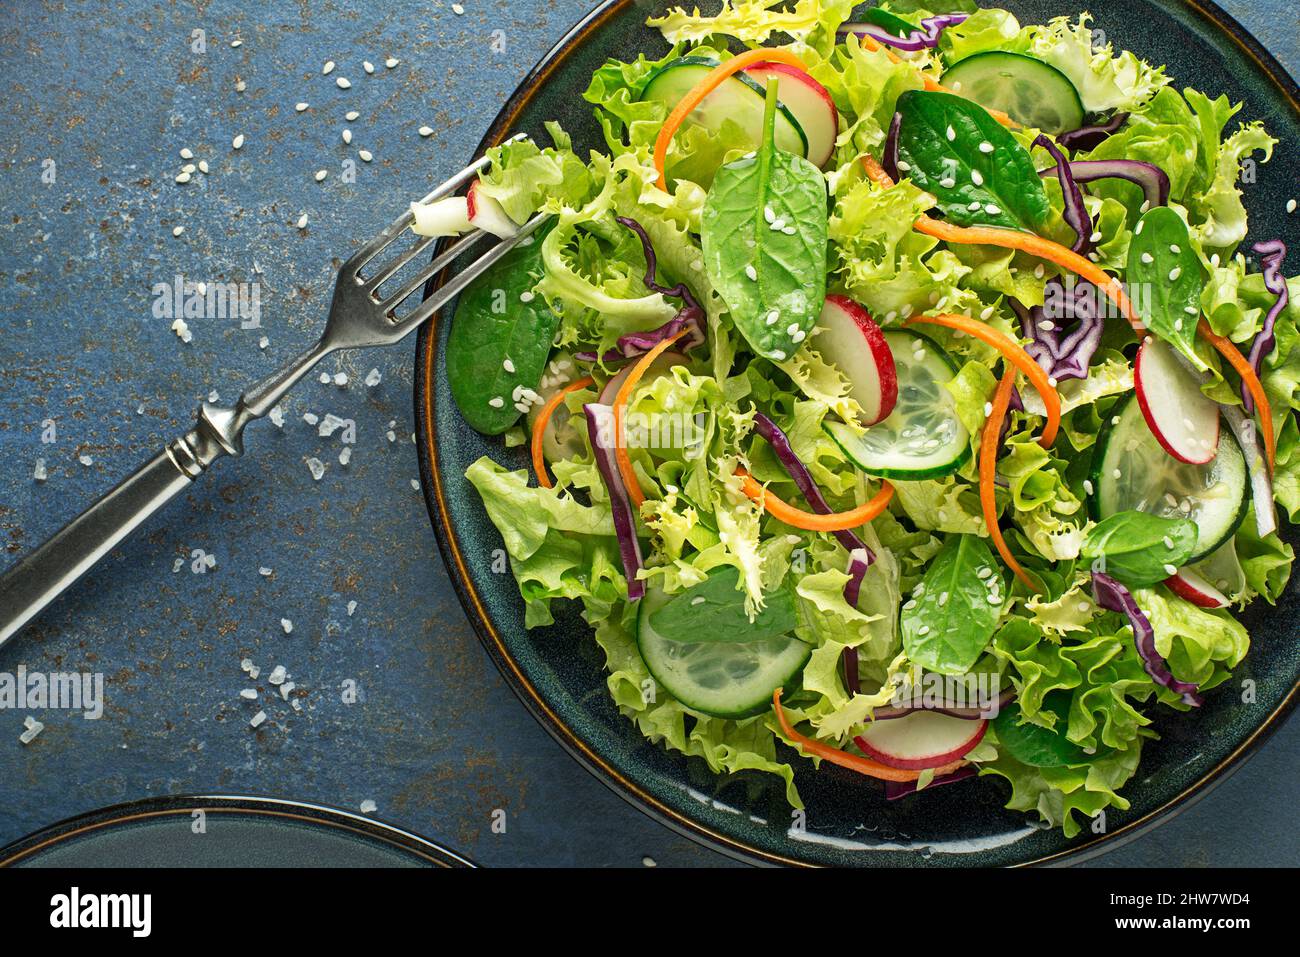 Green lettuce salad meal with fresh mixed vegetables on blue table background Stock Photo